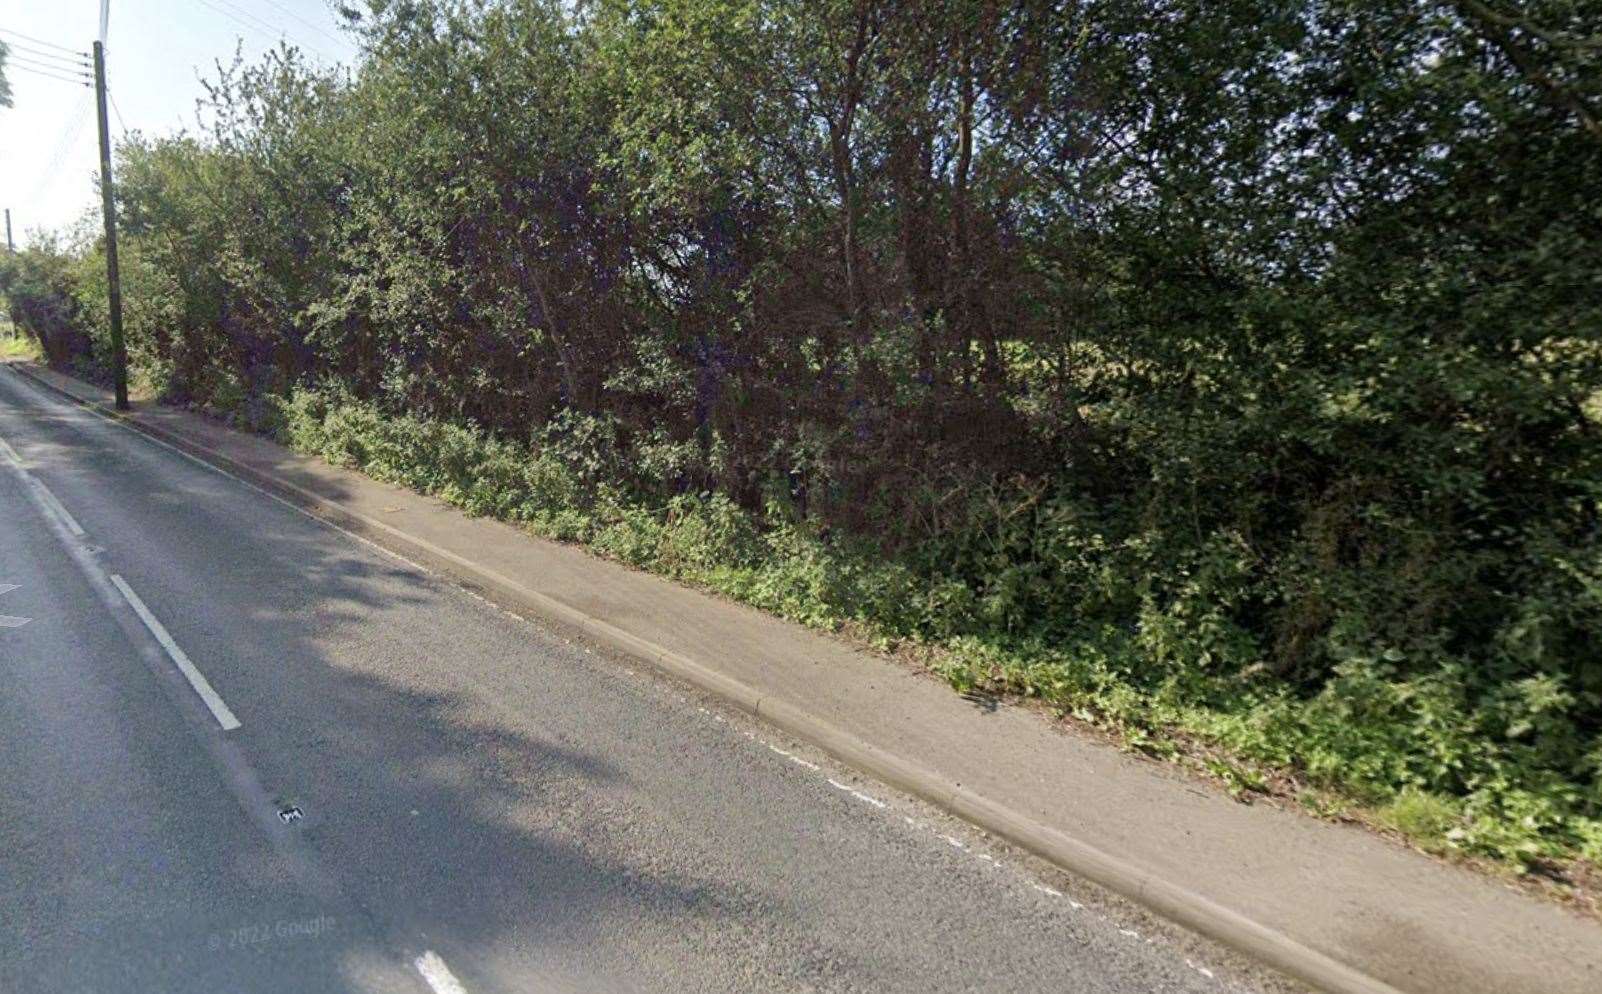 The site is off the A251. Picture: Google